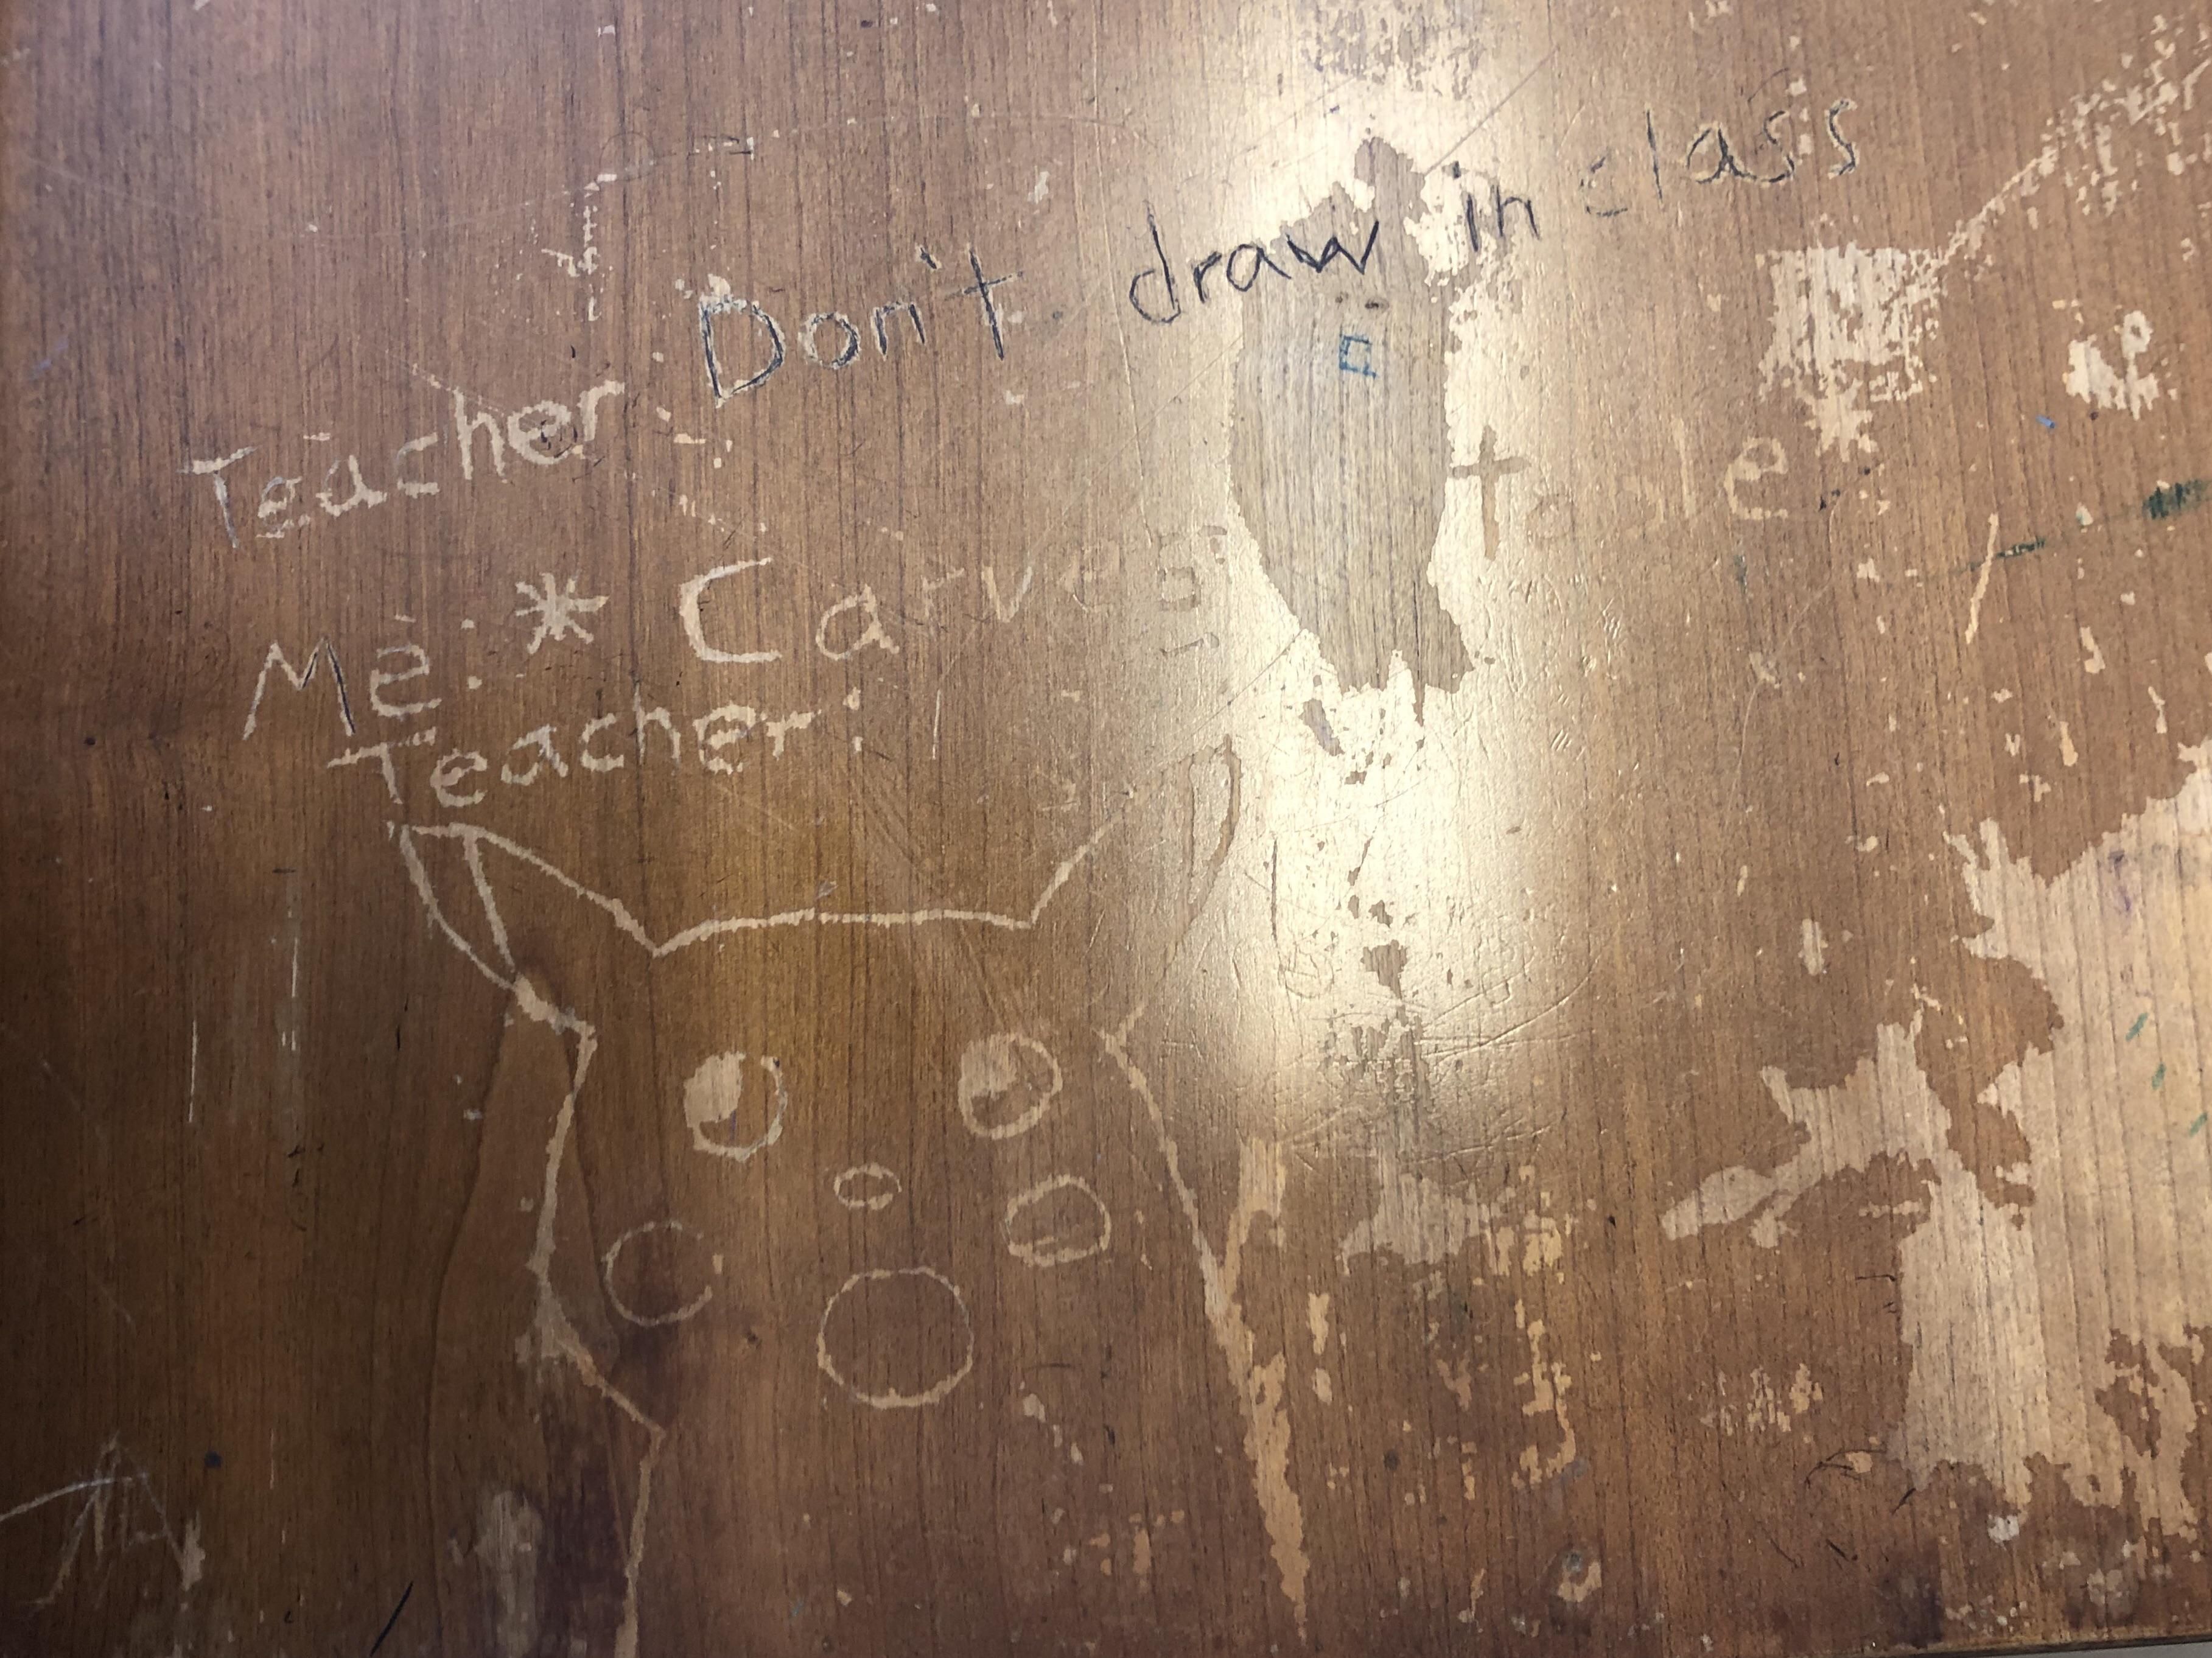 Found carved into a desk where I taught some classes this summer